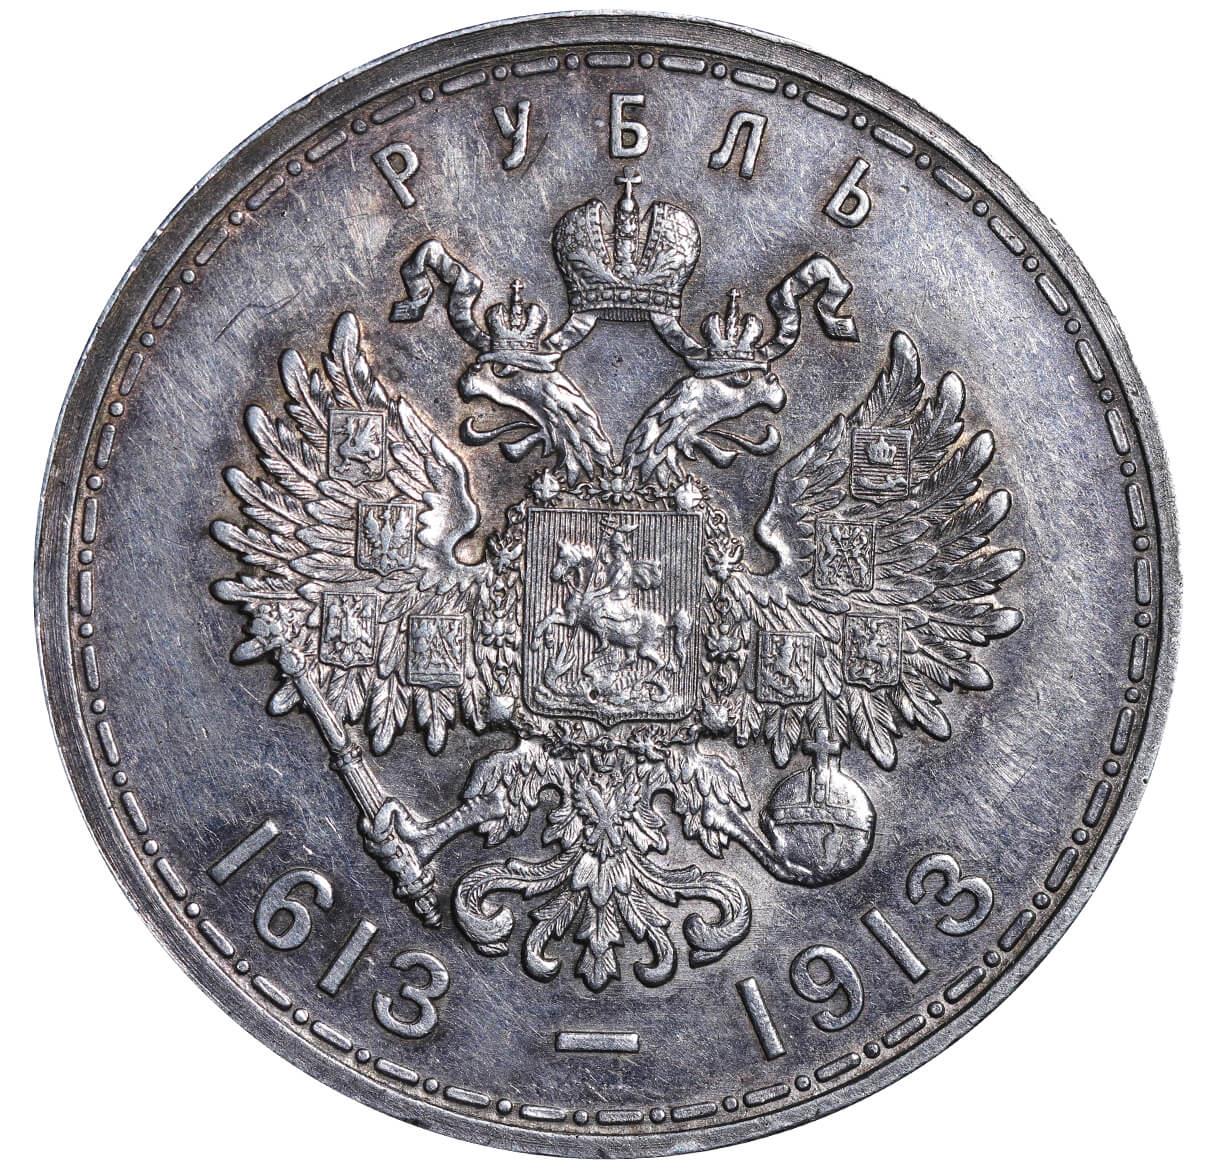 Russian Empire, 1 Rouble, 1913 year, 300th Anniversary of the Romanov Dynasty - Image 3 of 3